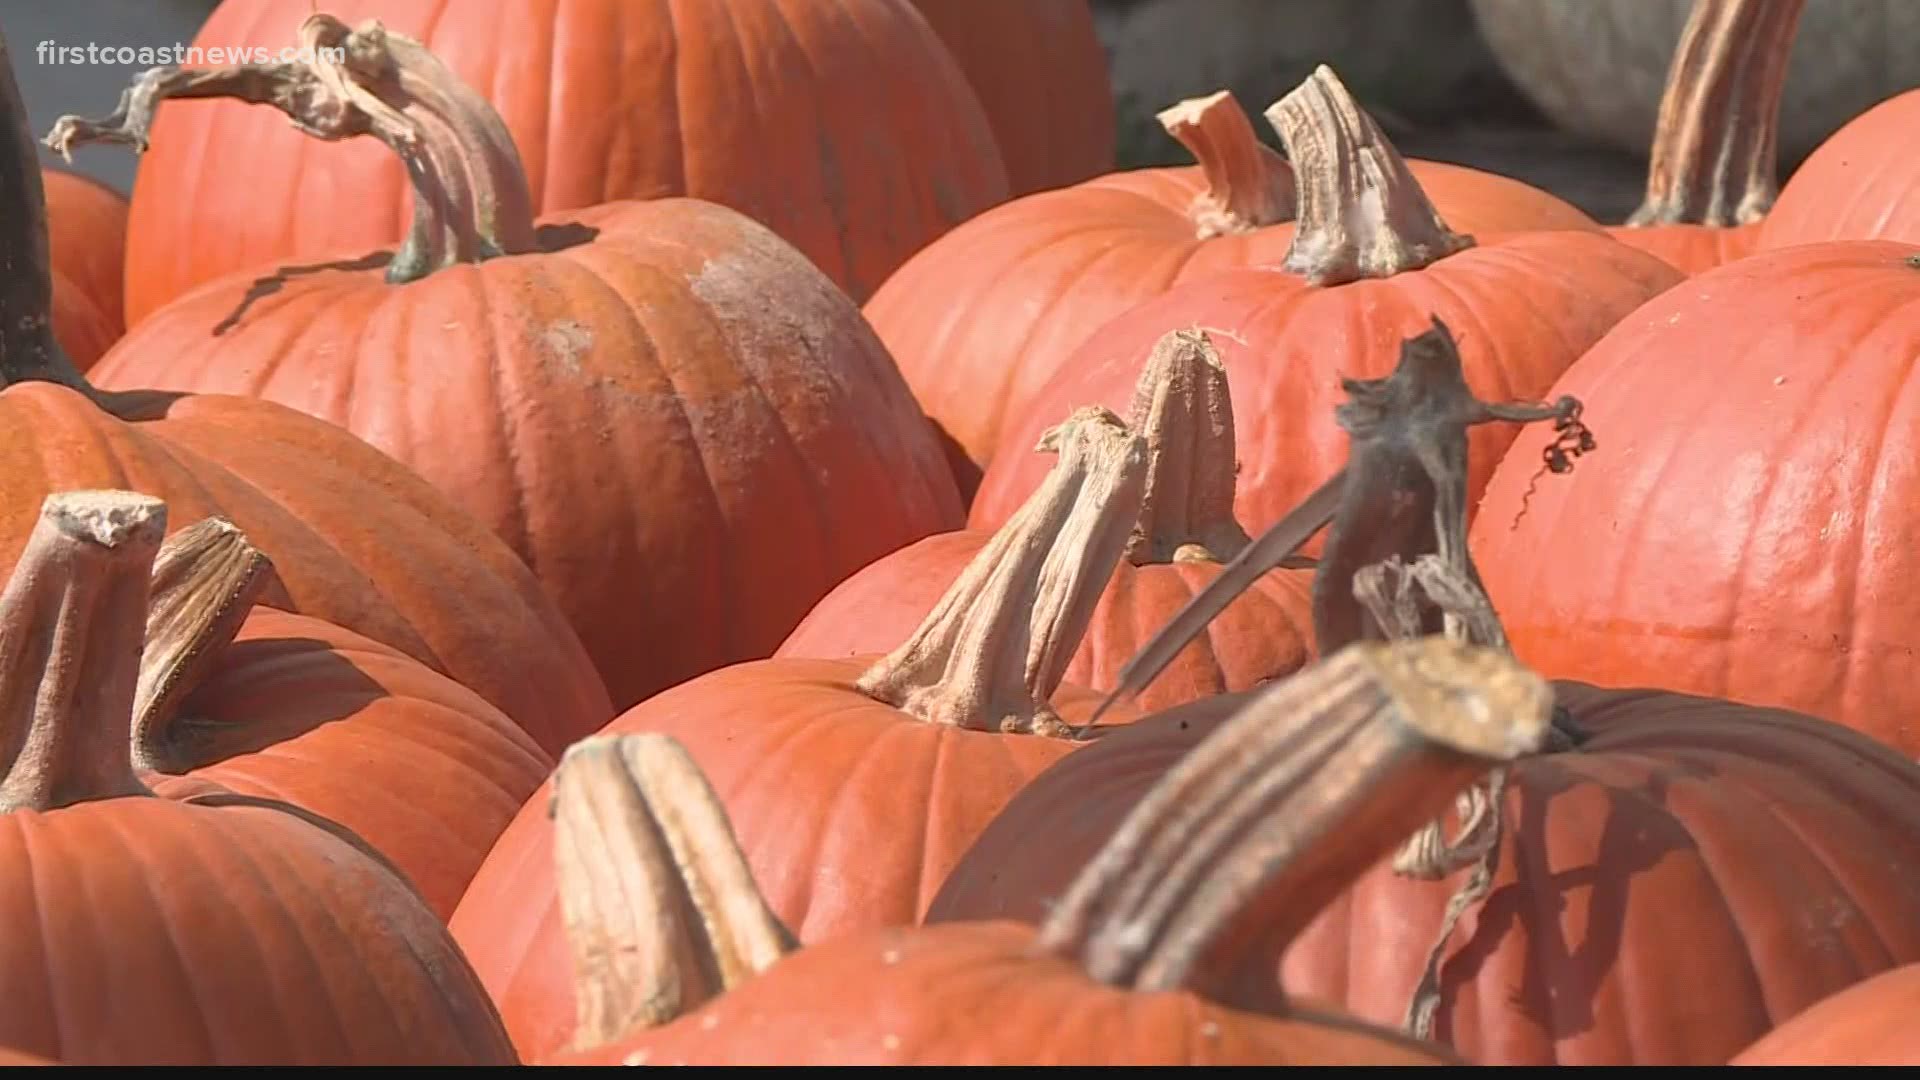 A church in St. Augustine known for its pumpkin patch said the coronavirus has impacted the supply and time they've gotten their pumpkins.